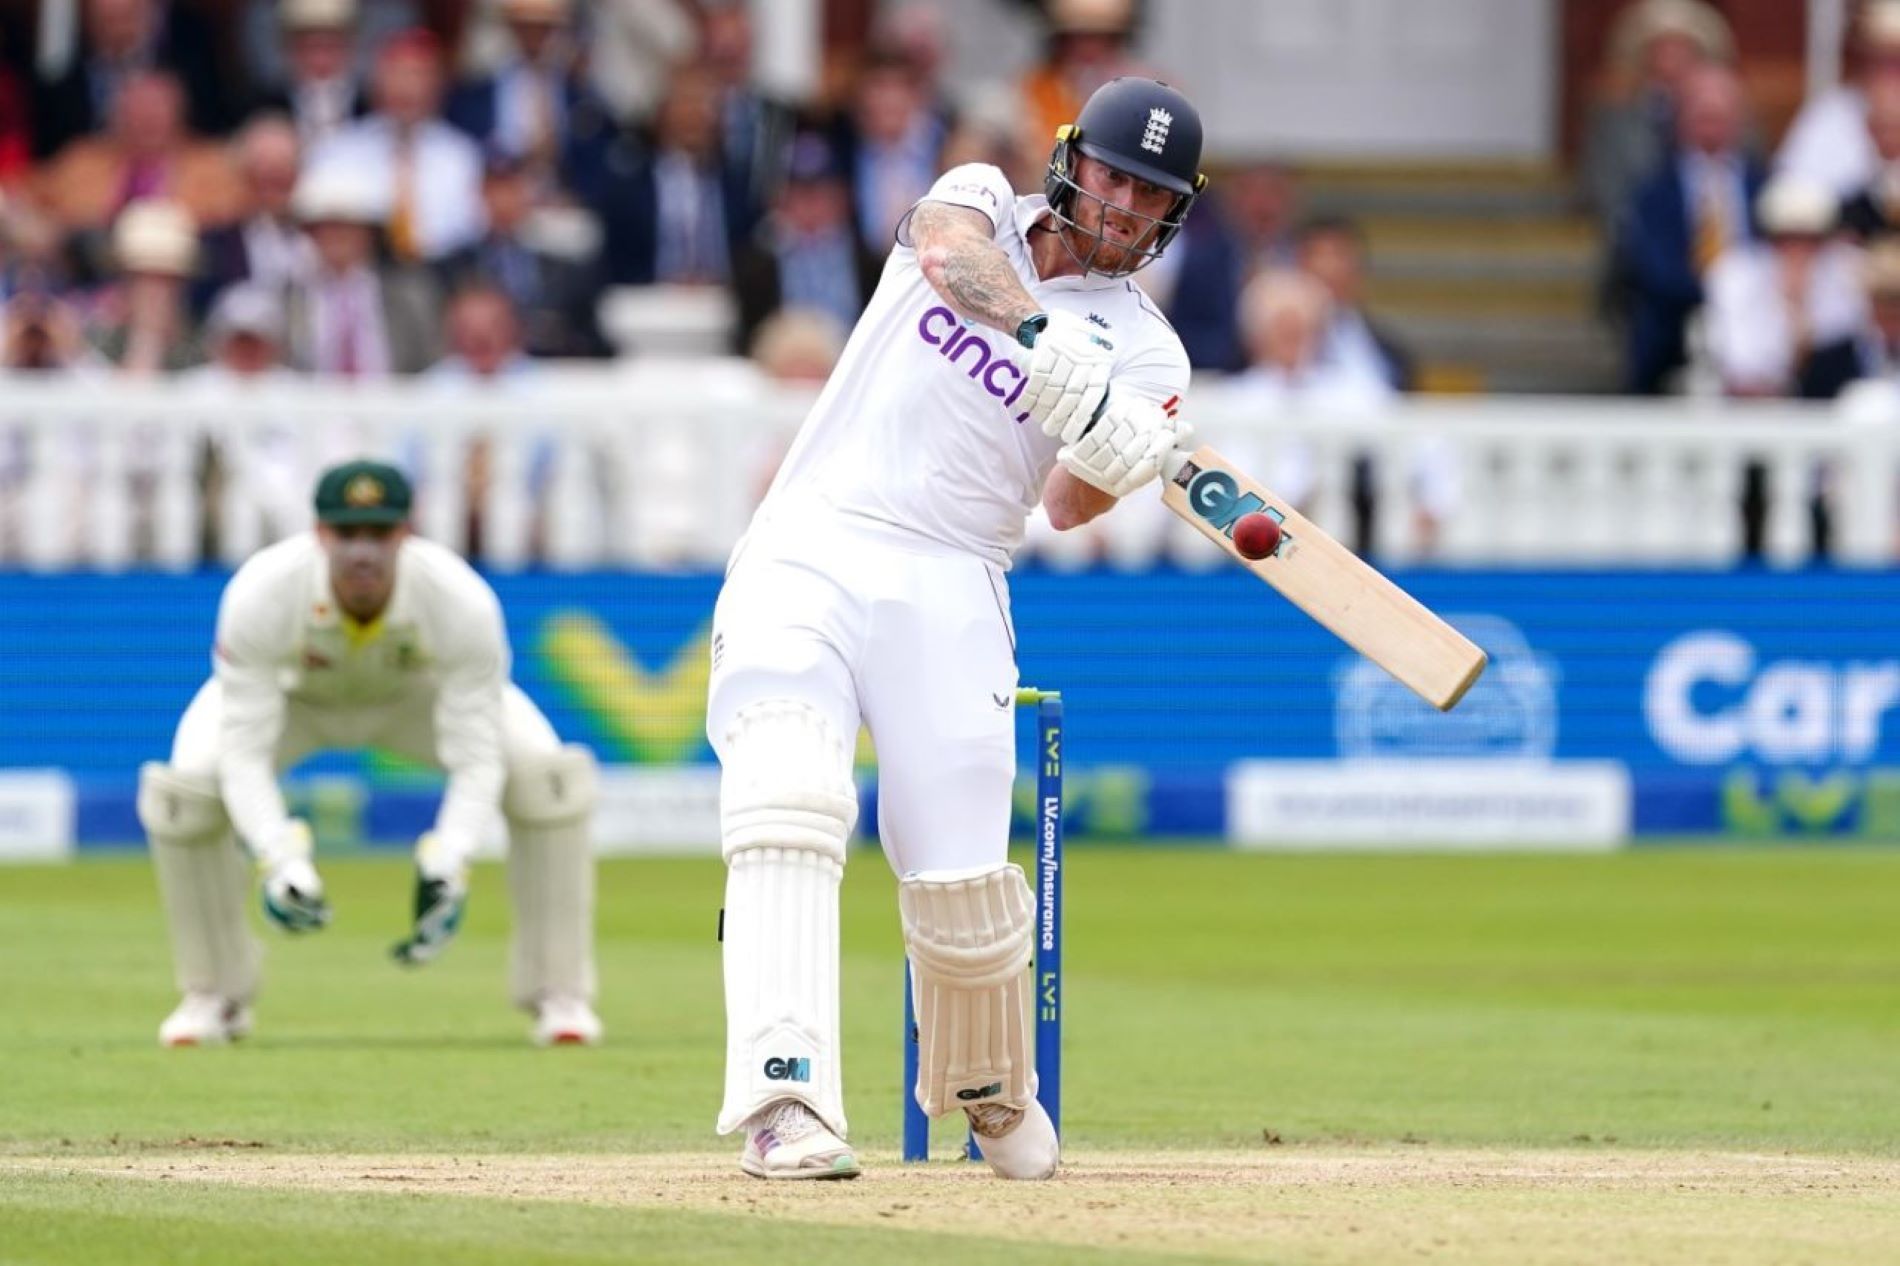 Ben Stokes nearly repeated his Headingley 2019 heroics with a stunning 155